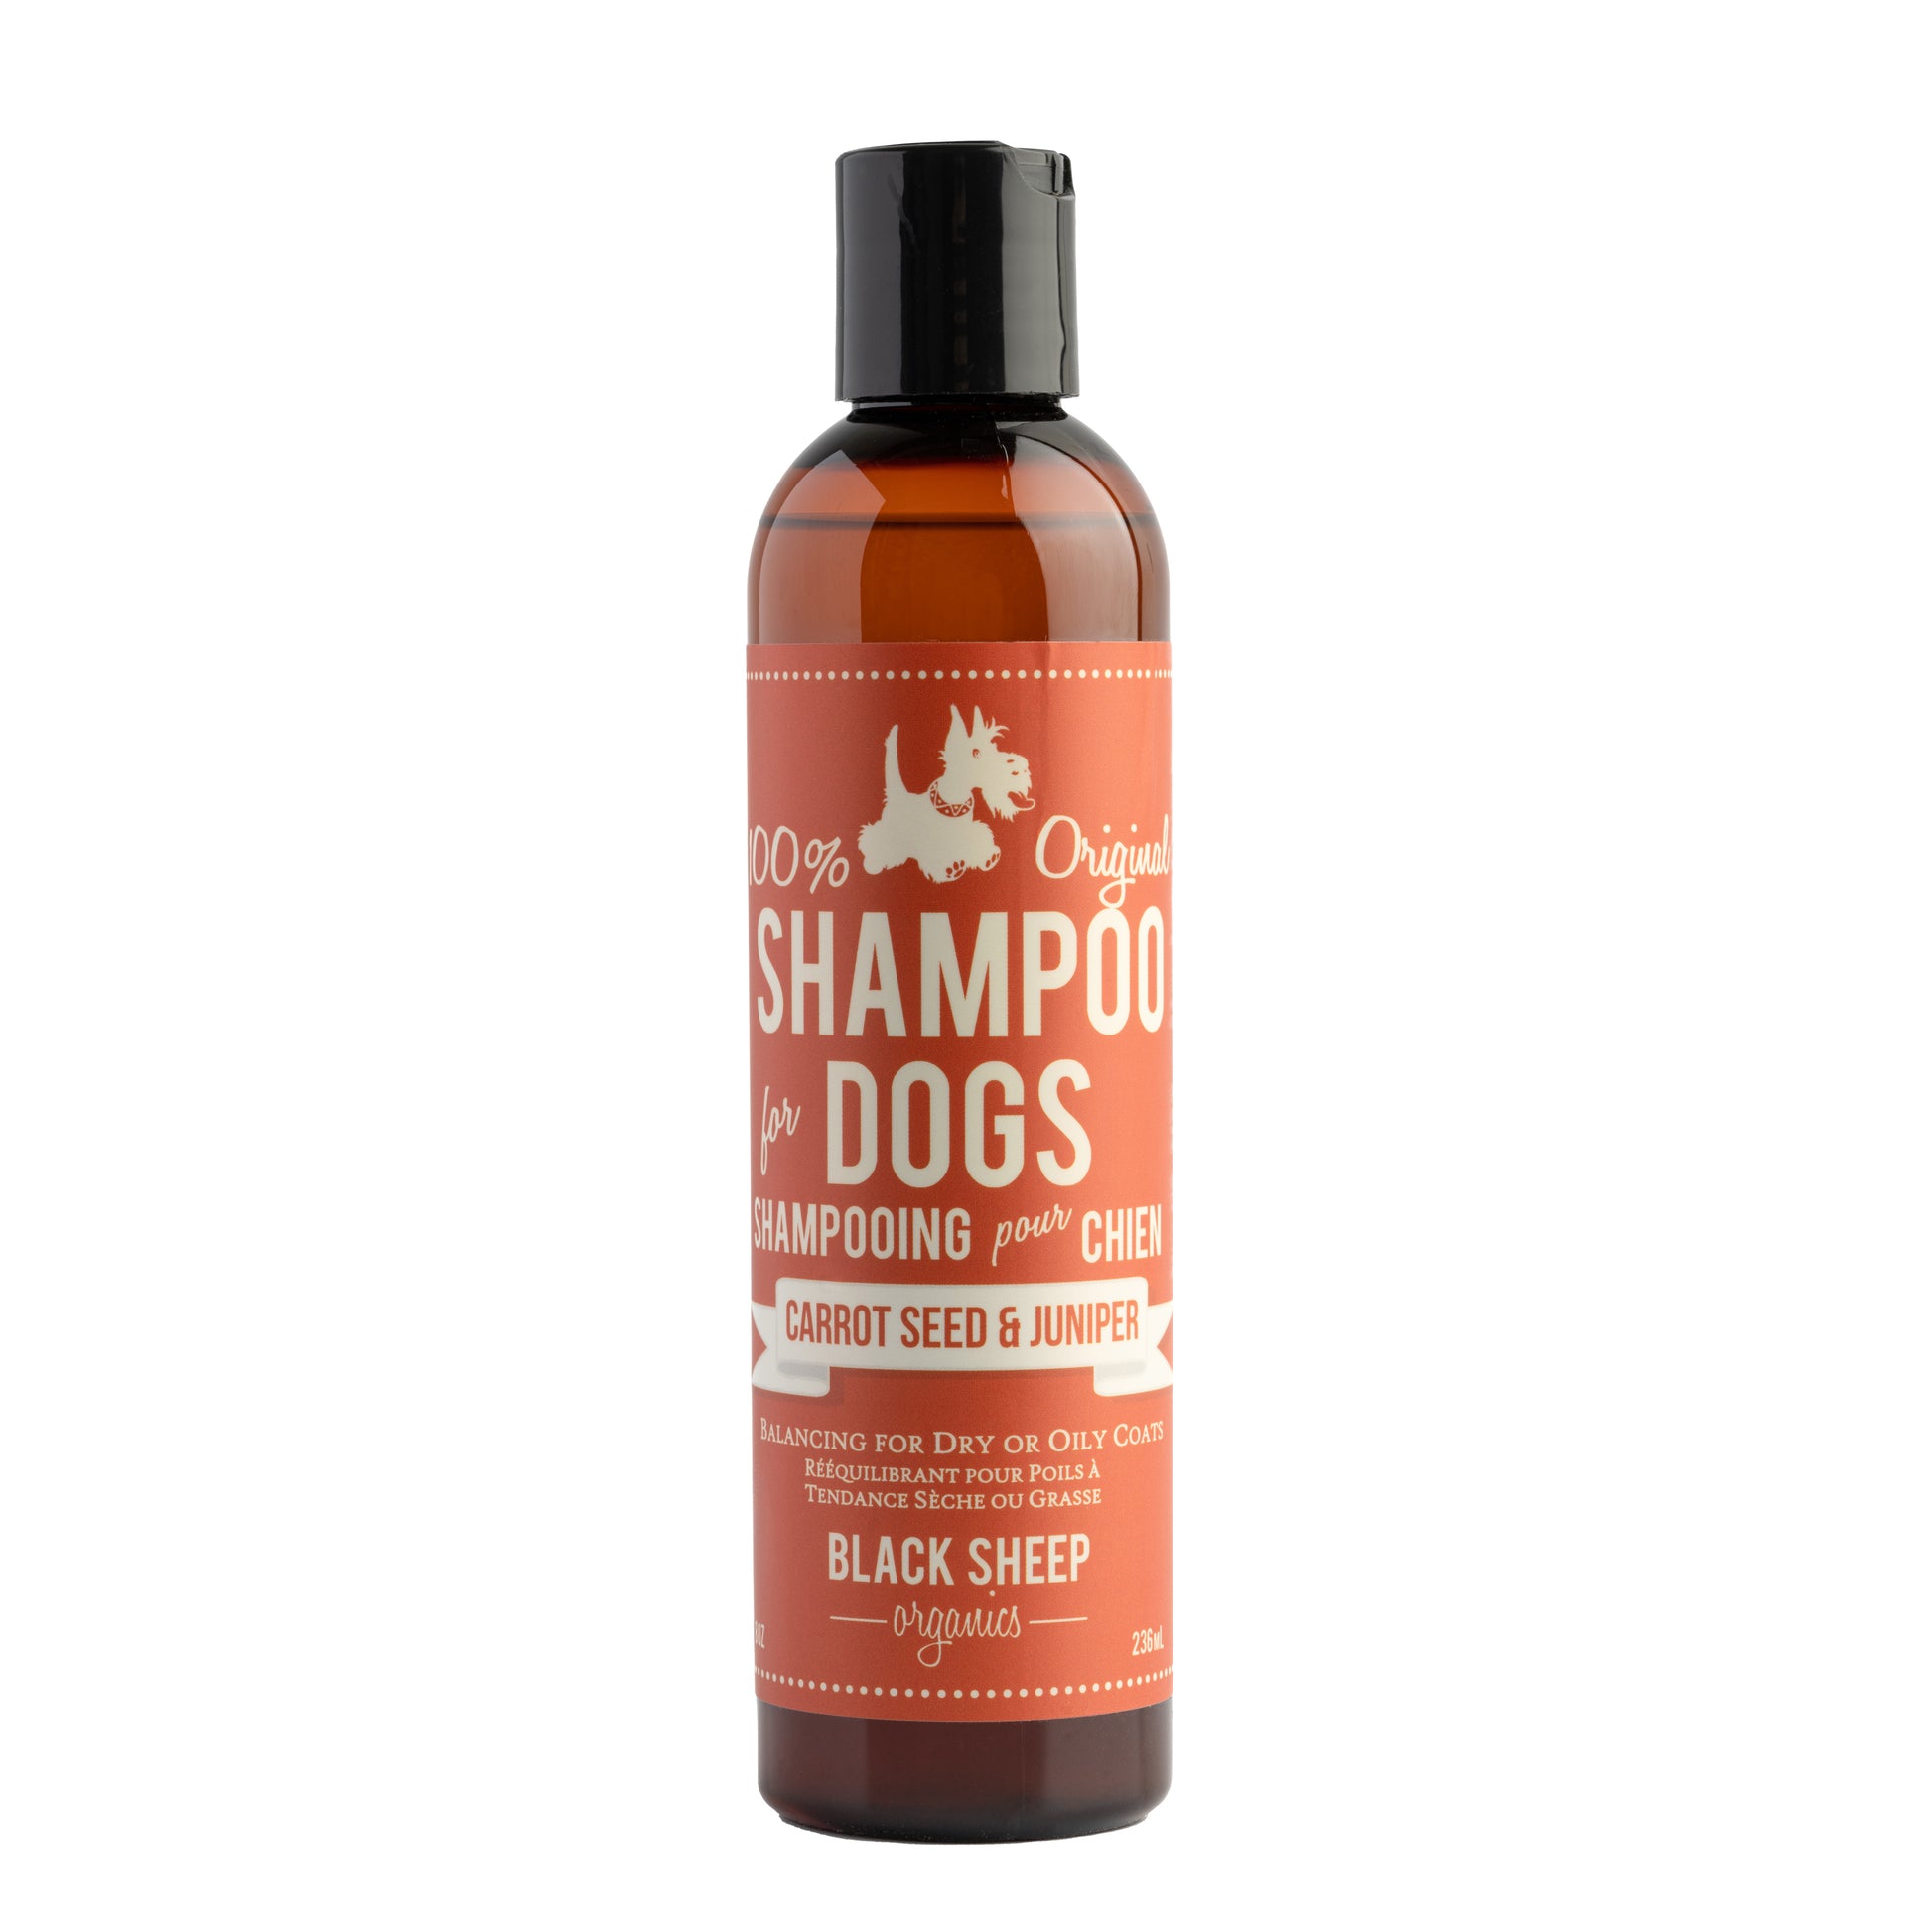 A carrot seed & juniper organic dog shampoo that can help dogs with oil balancing for shedding coats.